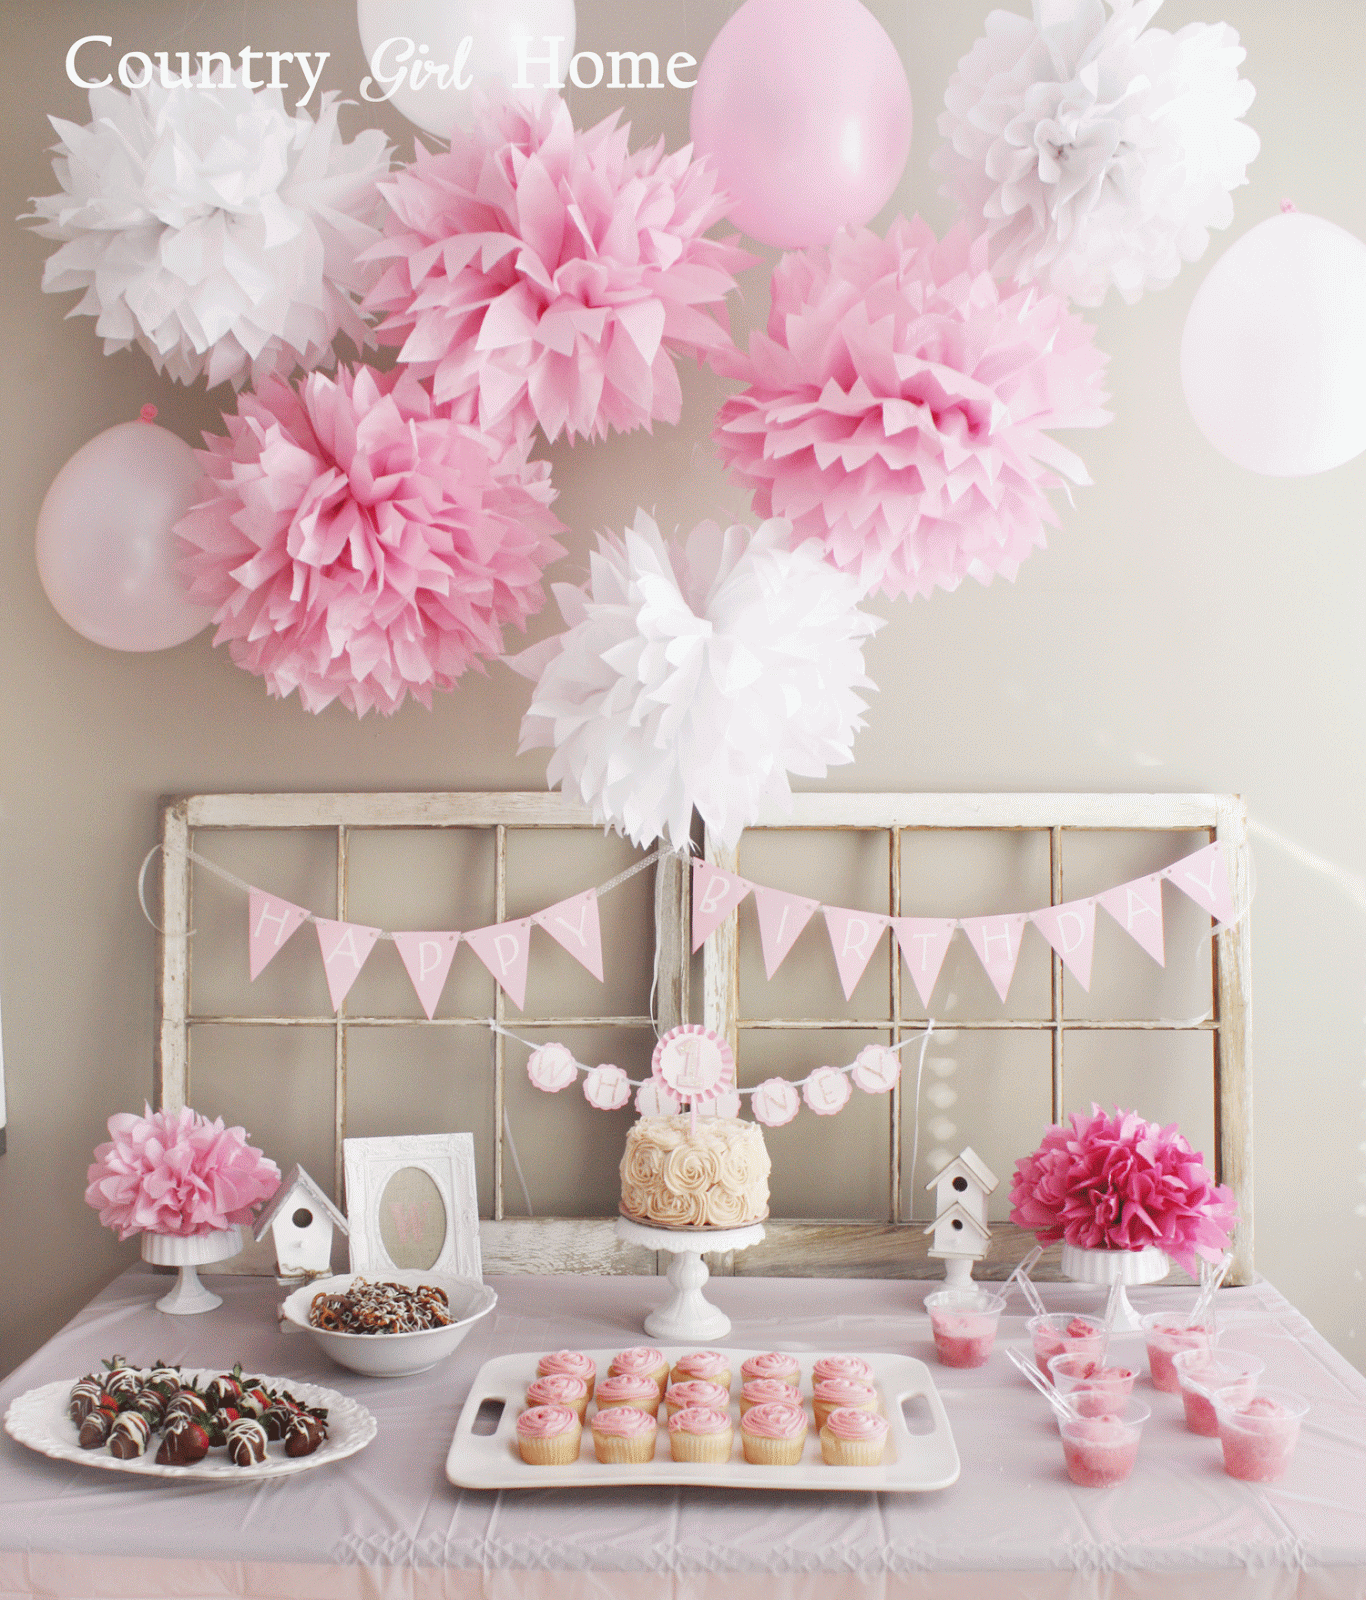 COUNTRY GIRL HOME : 1st Birthday!!